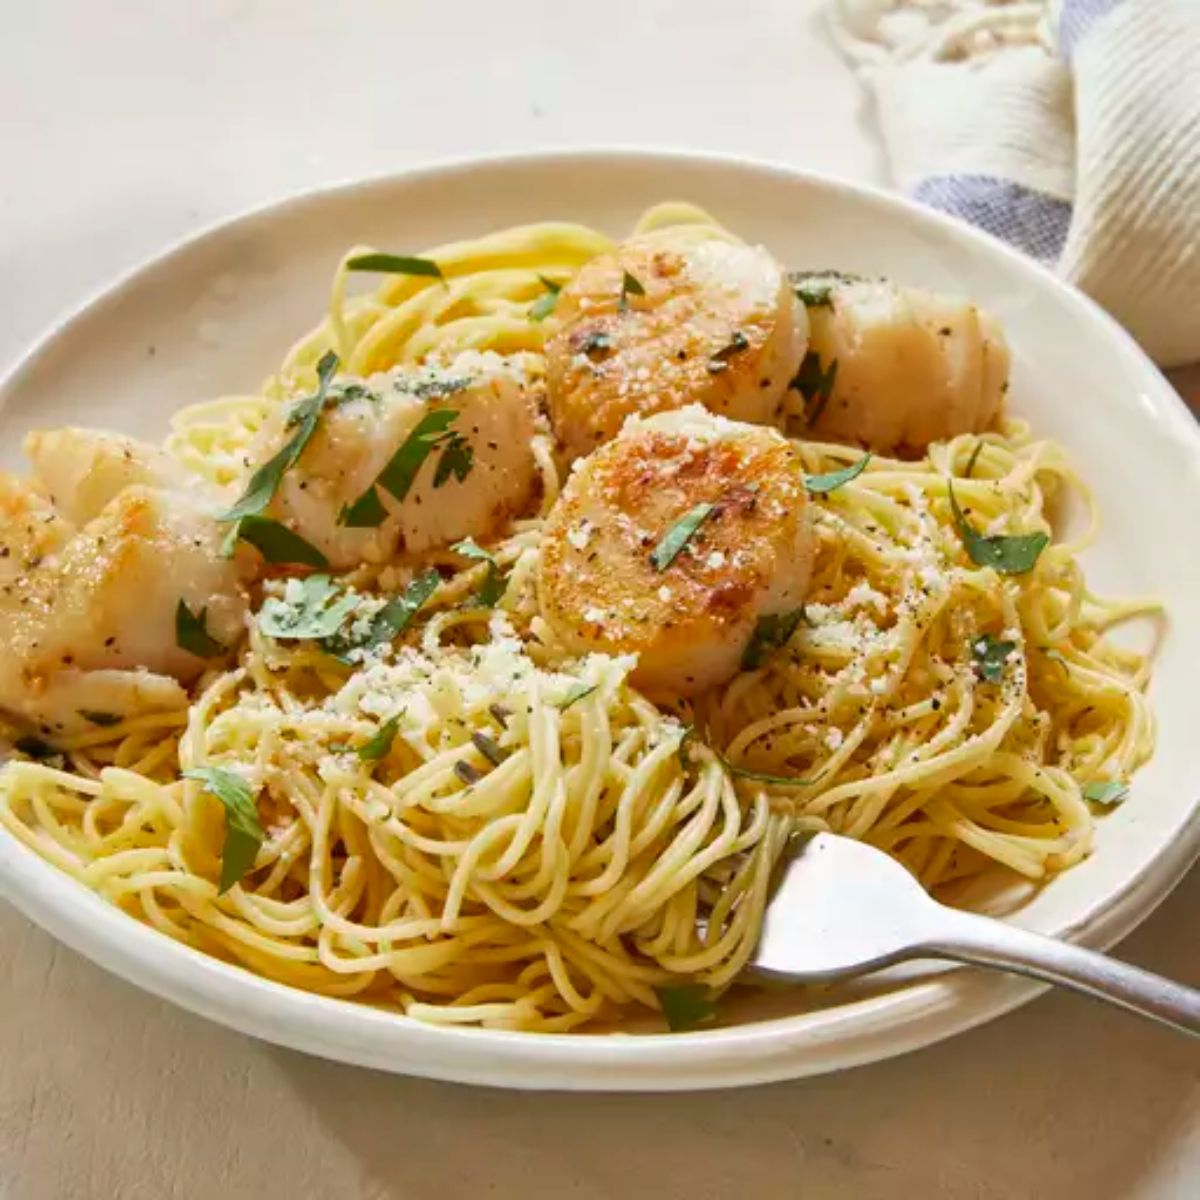 Tasty Savory Sea Scallops and Angel Hair Pasta in a white bowl with a fork.